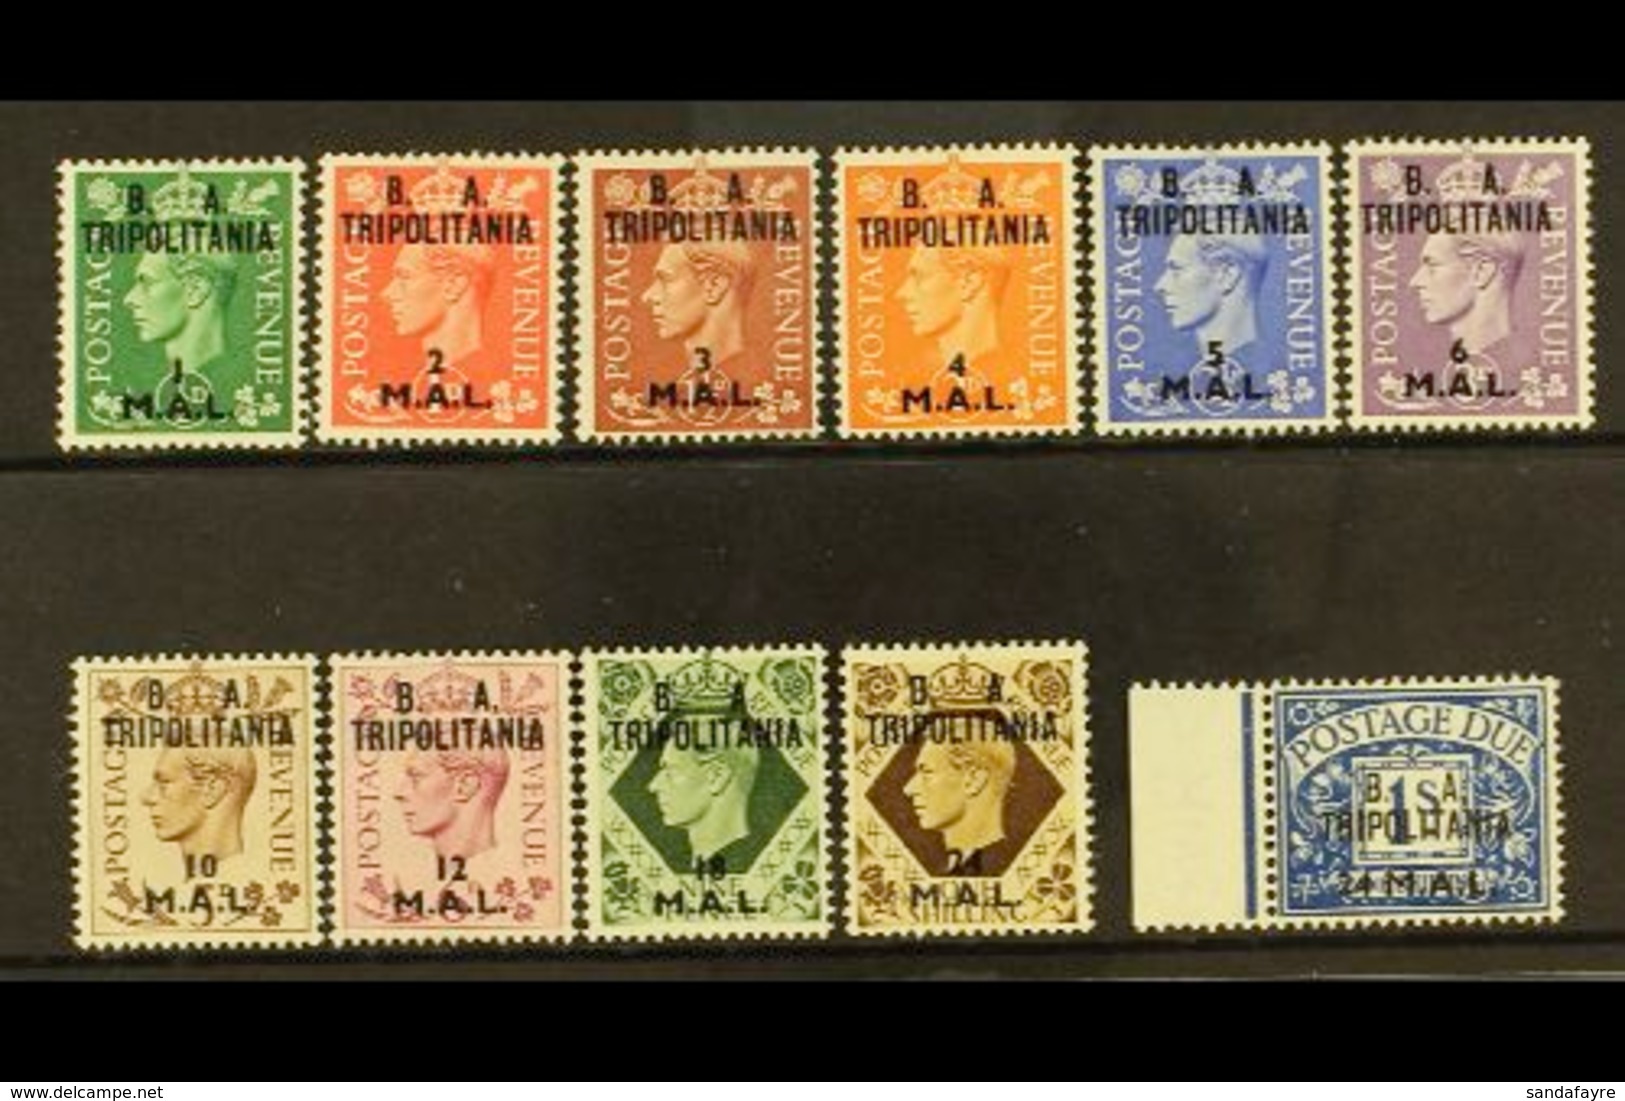 TRIPOLITANIA 1950 "B.A." Set To 24L On 1s (SG T14/23), Plus 24L On 1s Postage Due (SG TD10), Very Fine Mint. (11 Stamps) - Africa Orientale Italiana